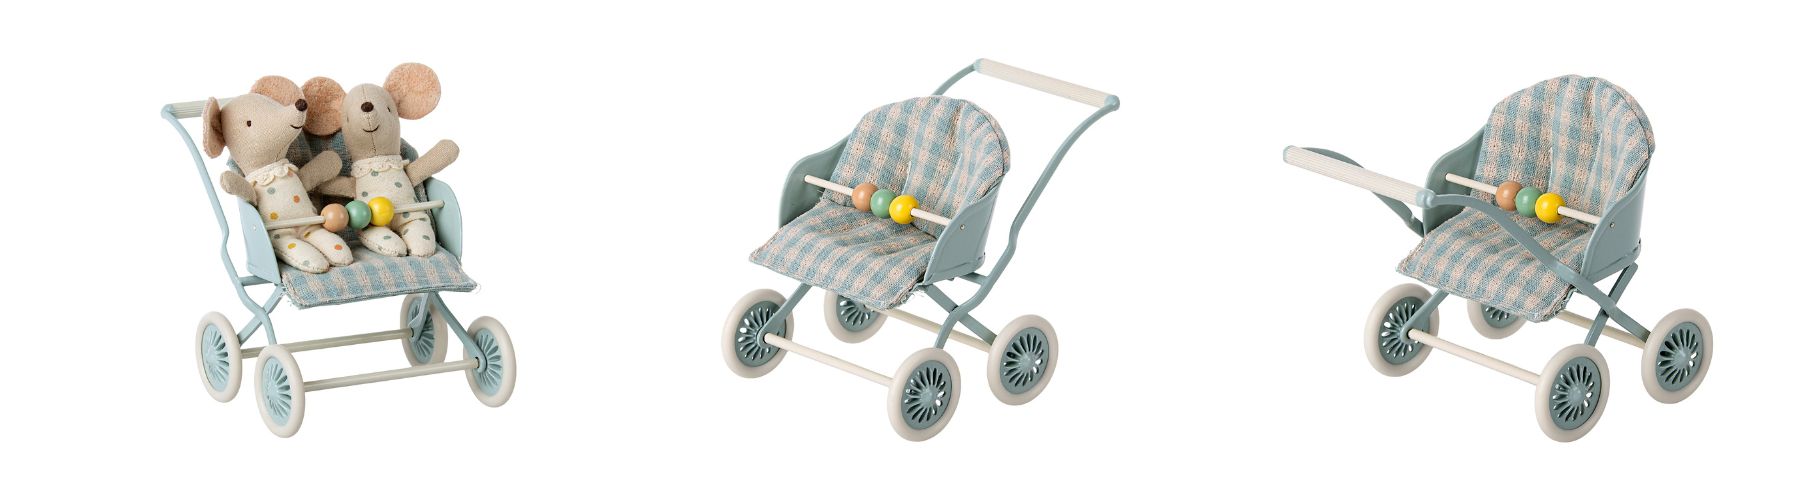 Maileg SS23 mint stroller and twin mice